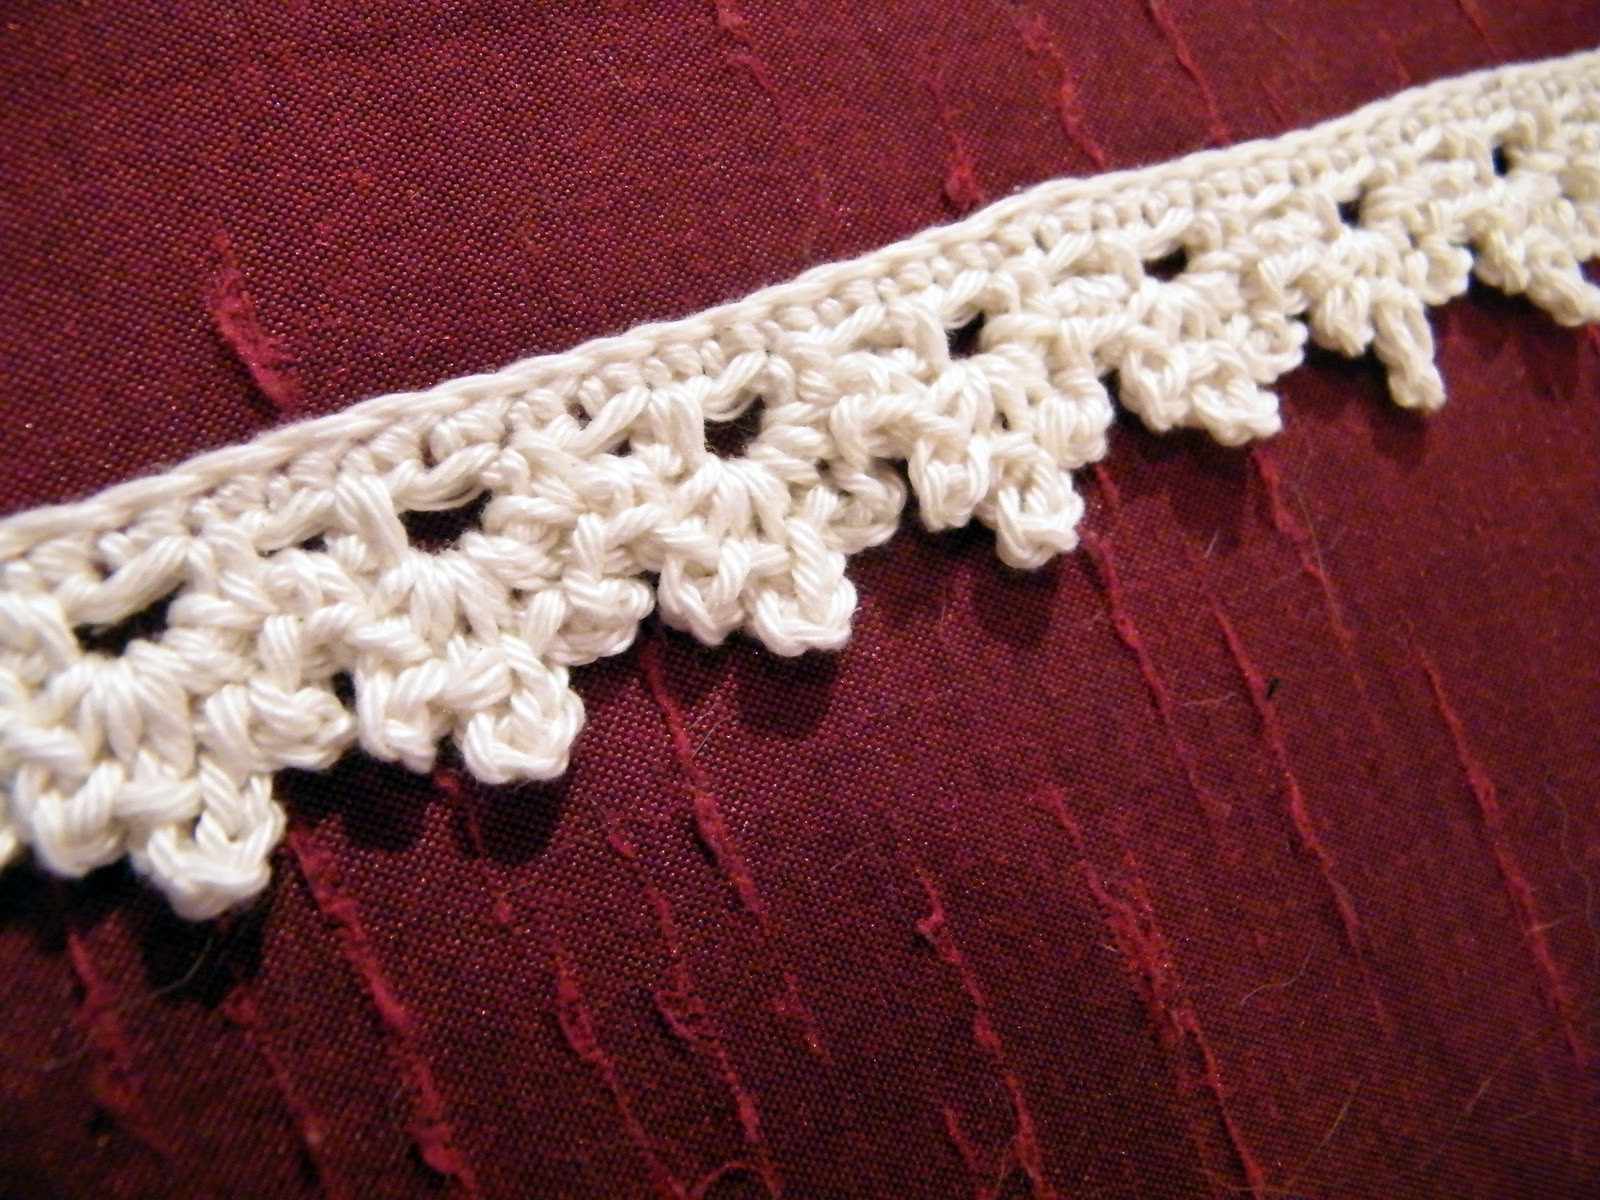 RubyRed Eclectic: Designed My Own Little Crochet Edging!!